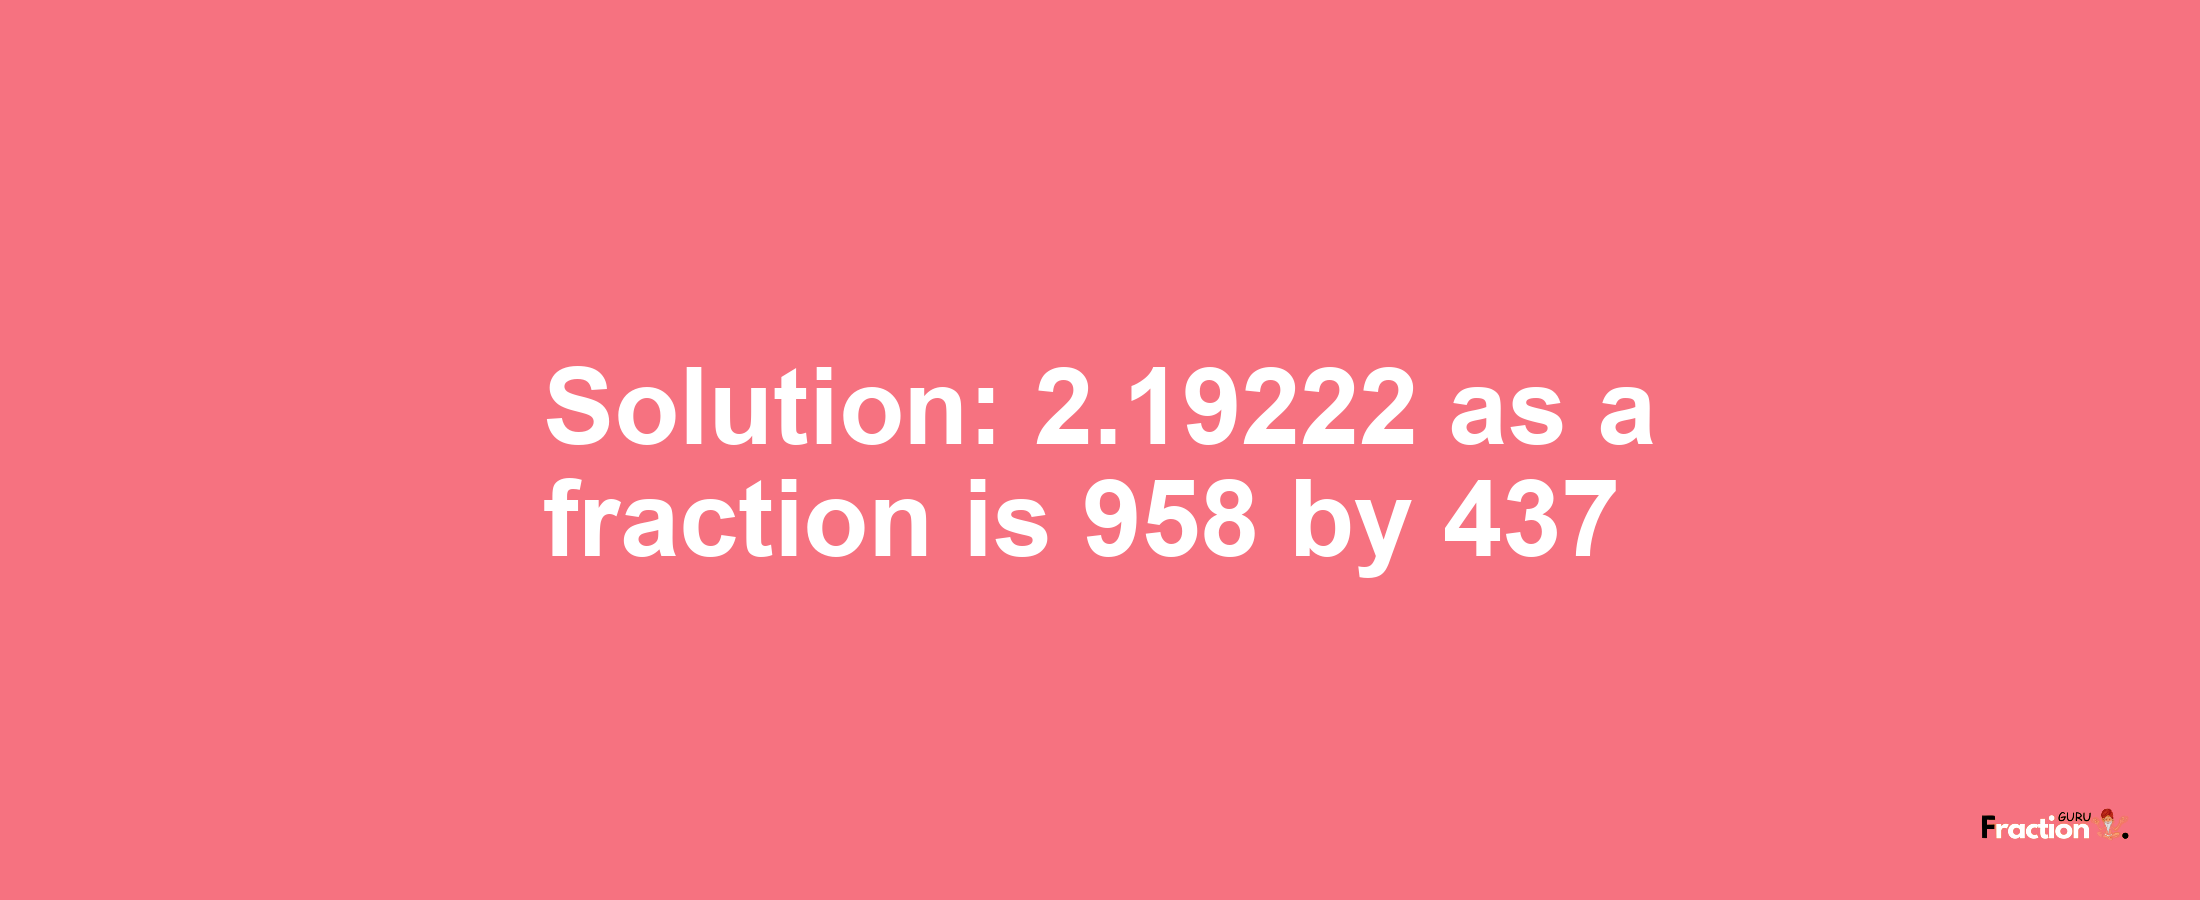 Solution:2.19222 as a fraction is 958/437